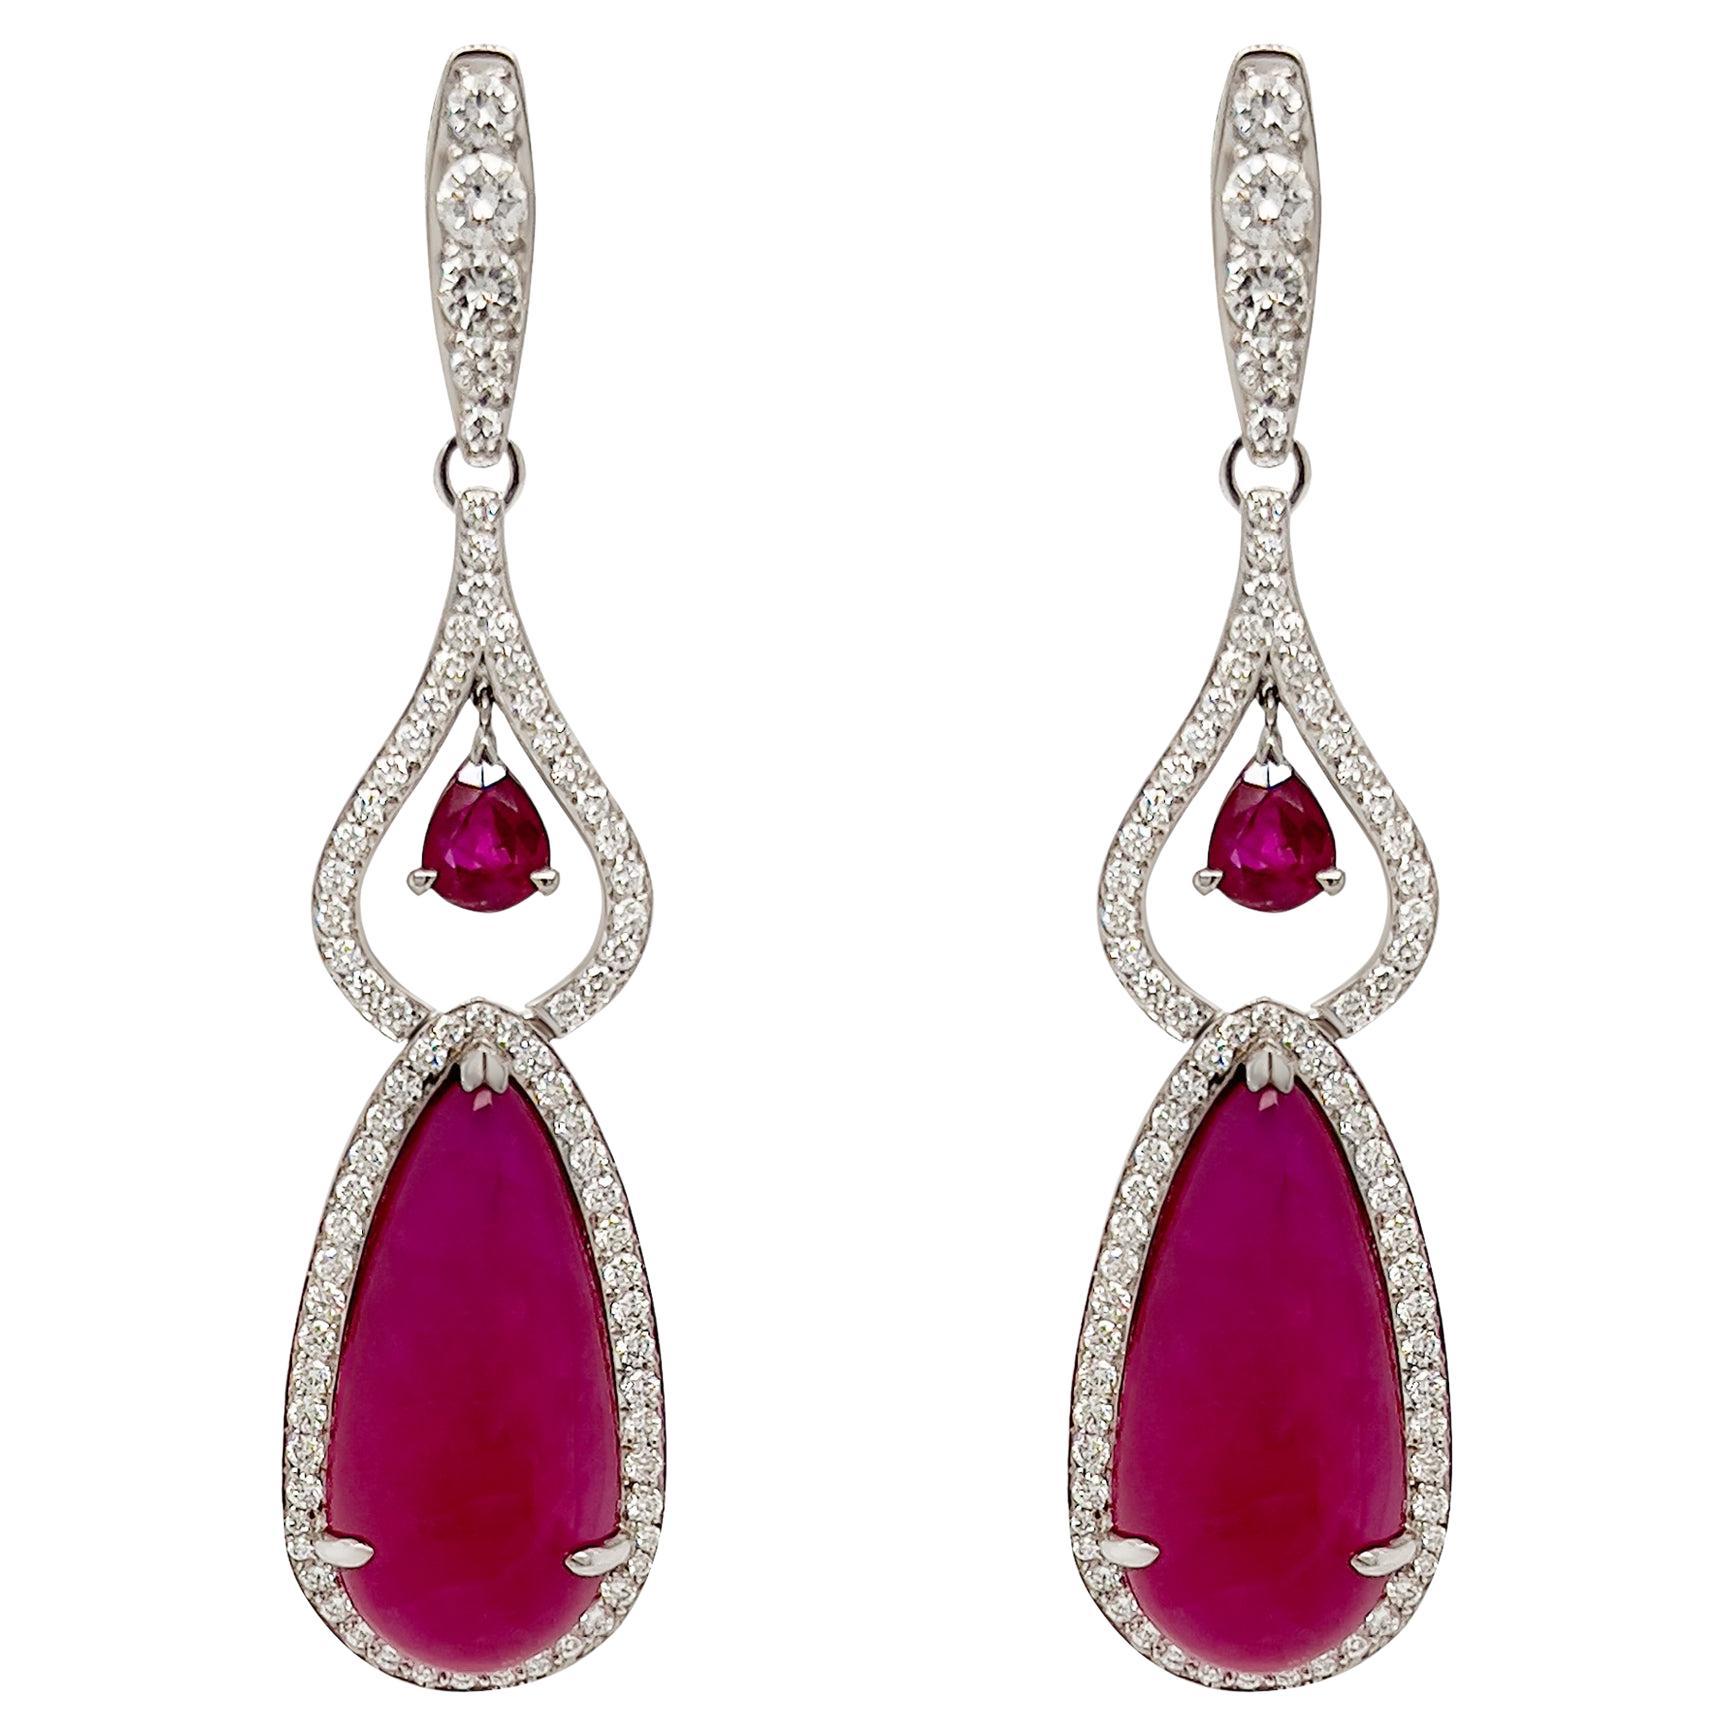 25.86 Carat Ruby Cabochon and Diamond Drop Earrings in 18 Karat White Gold